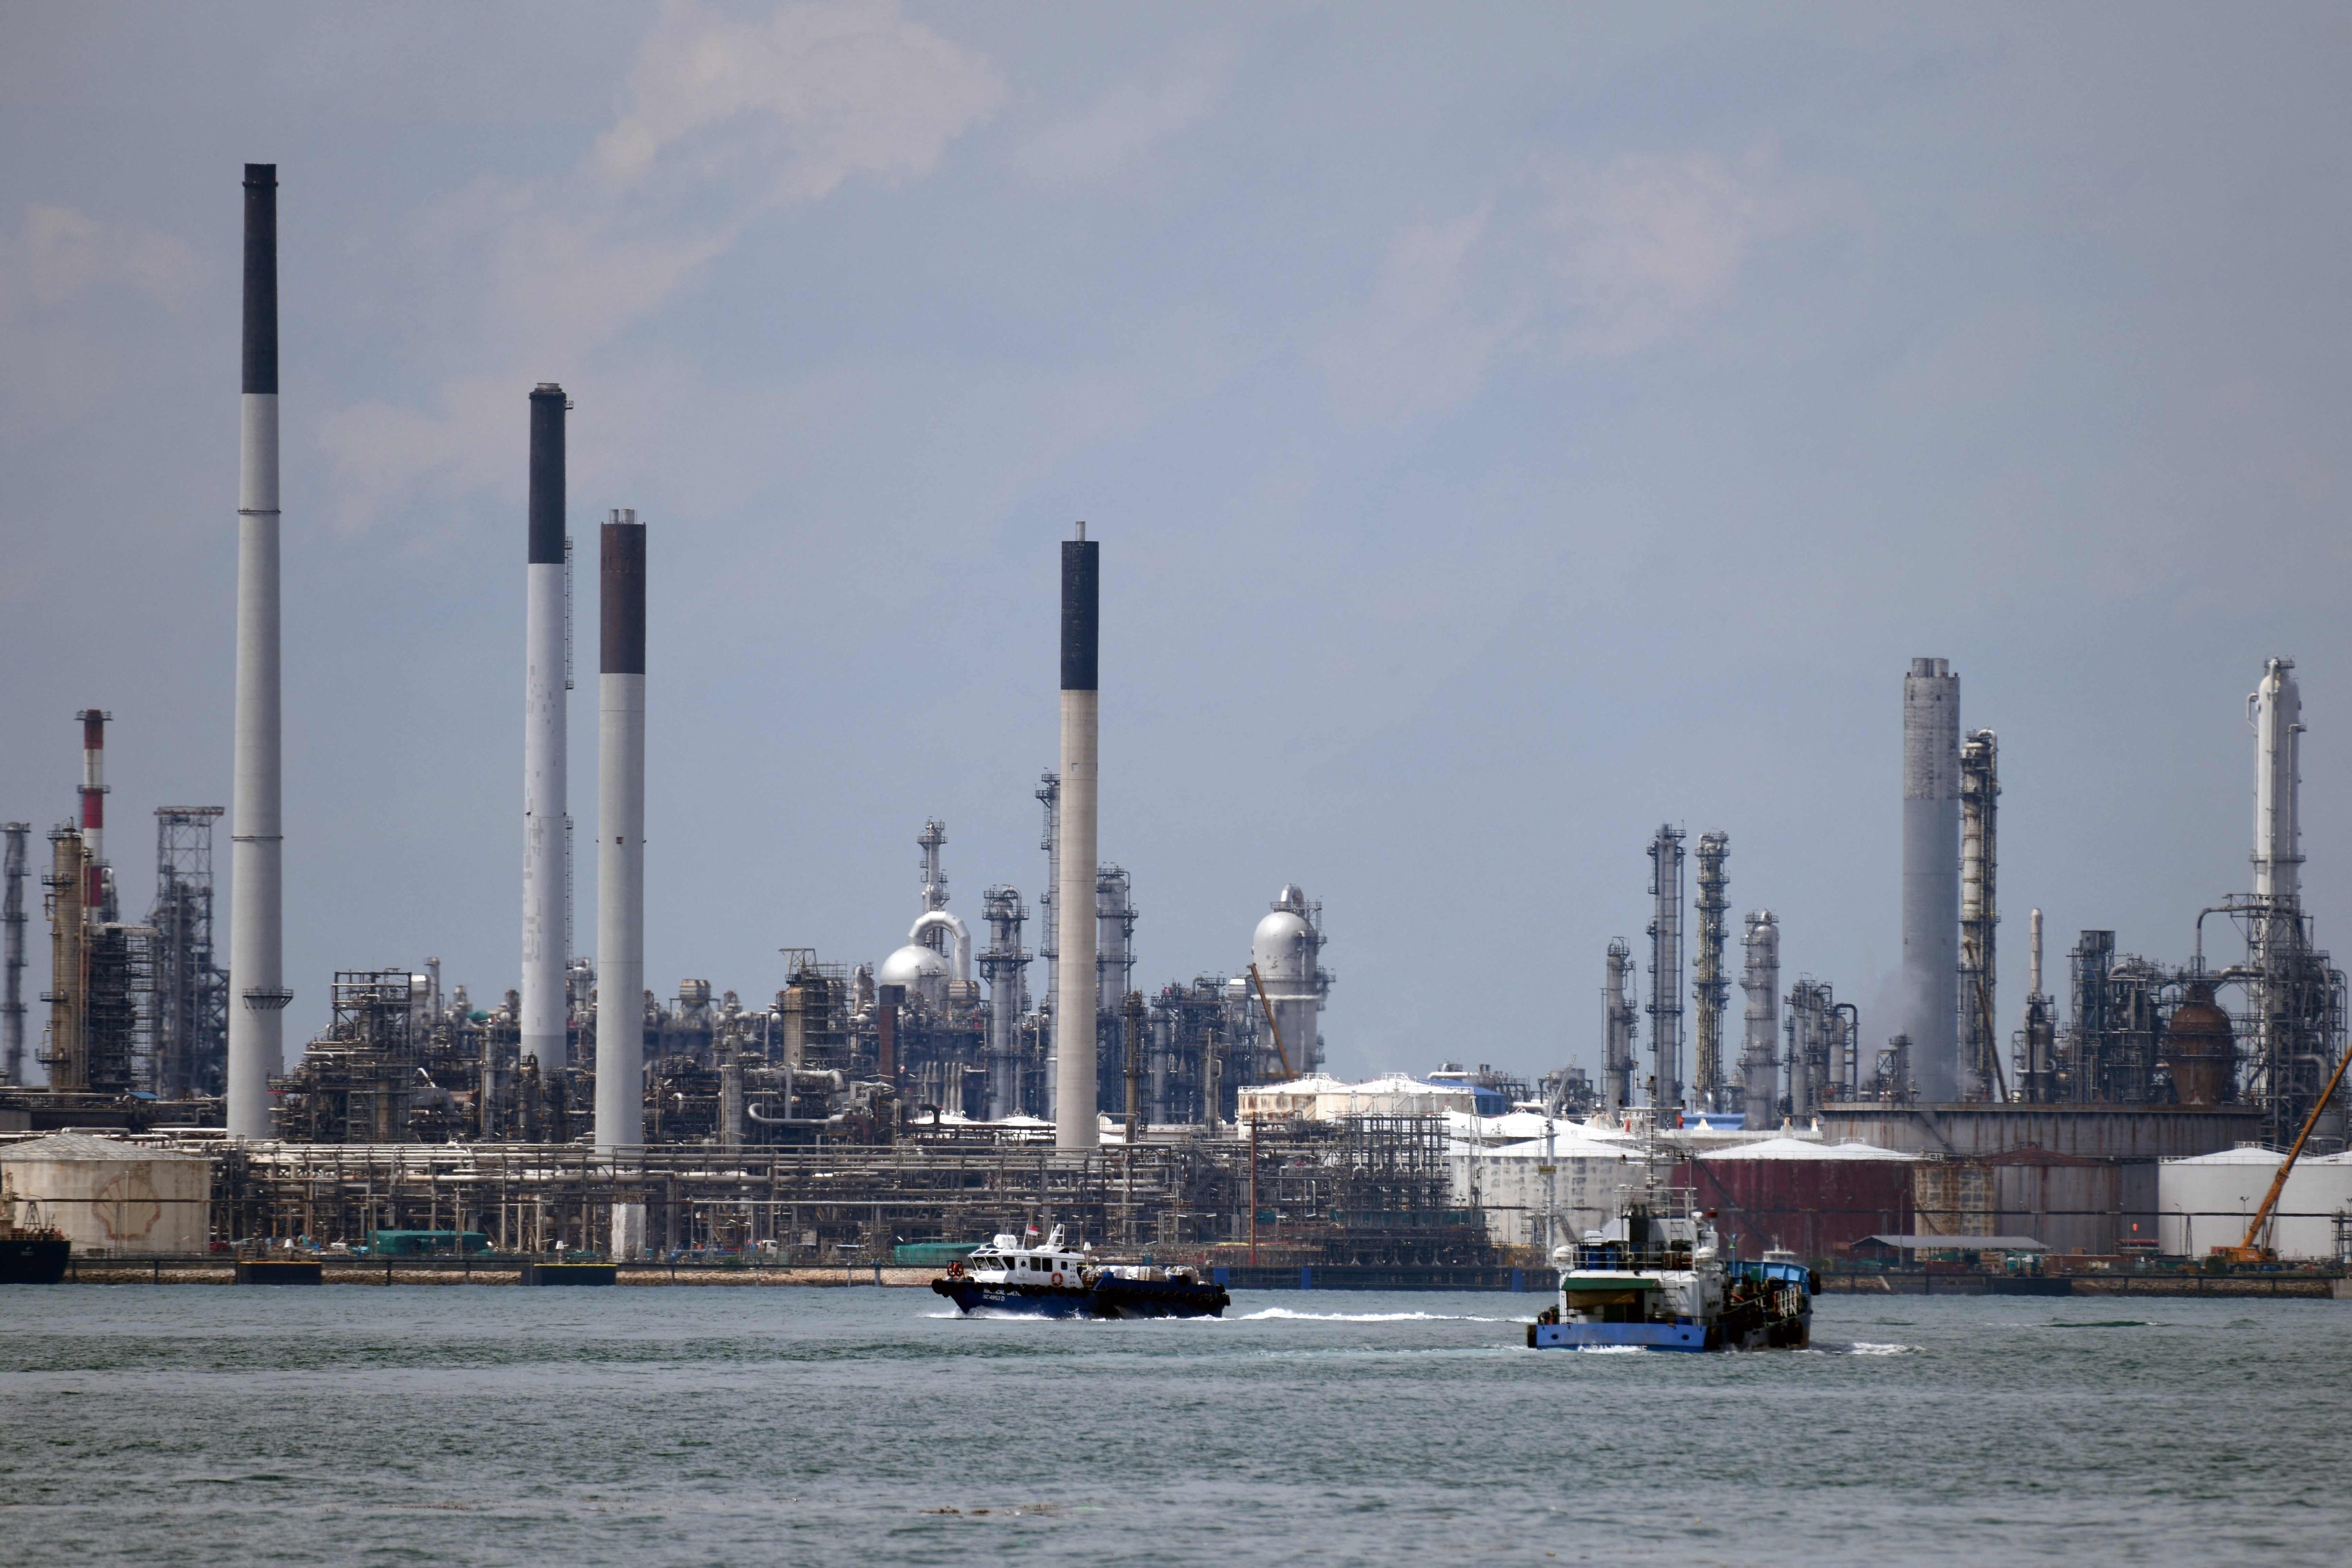 Boats sail past the Shell refinery on Pulau Bukom, or Bukom island, off Singapore. The facility opened in 1961. Photo: AFP